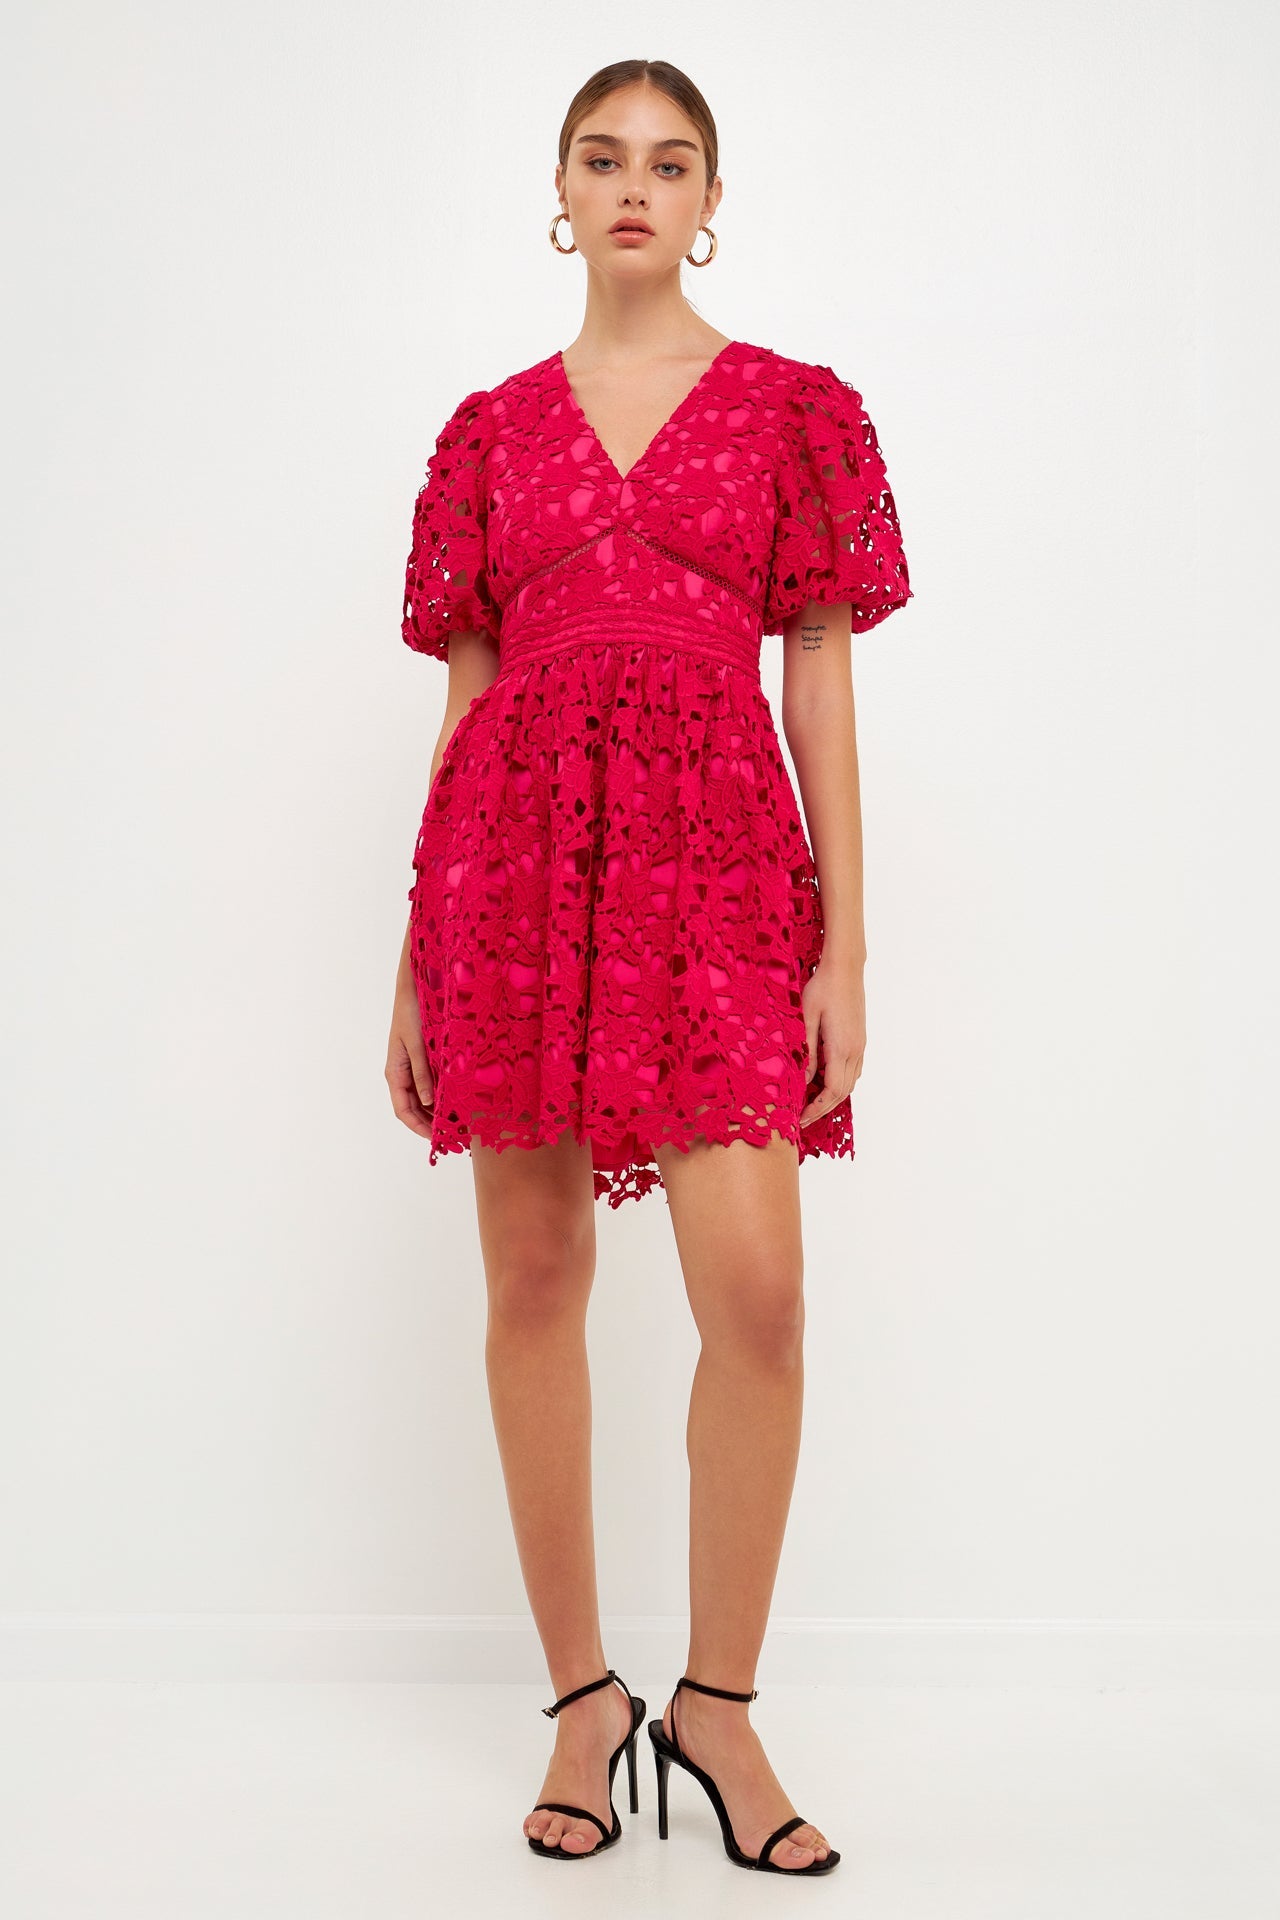 Endless Rose - Crochet Lace Puff Sleeve Mini Dress - Dresses in Women's Clothing available at endlessrose.com